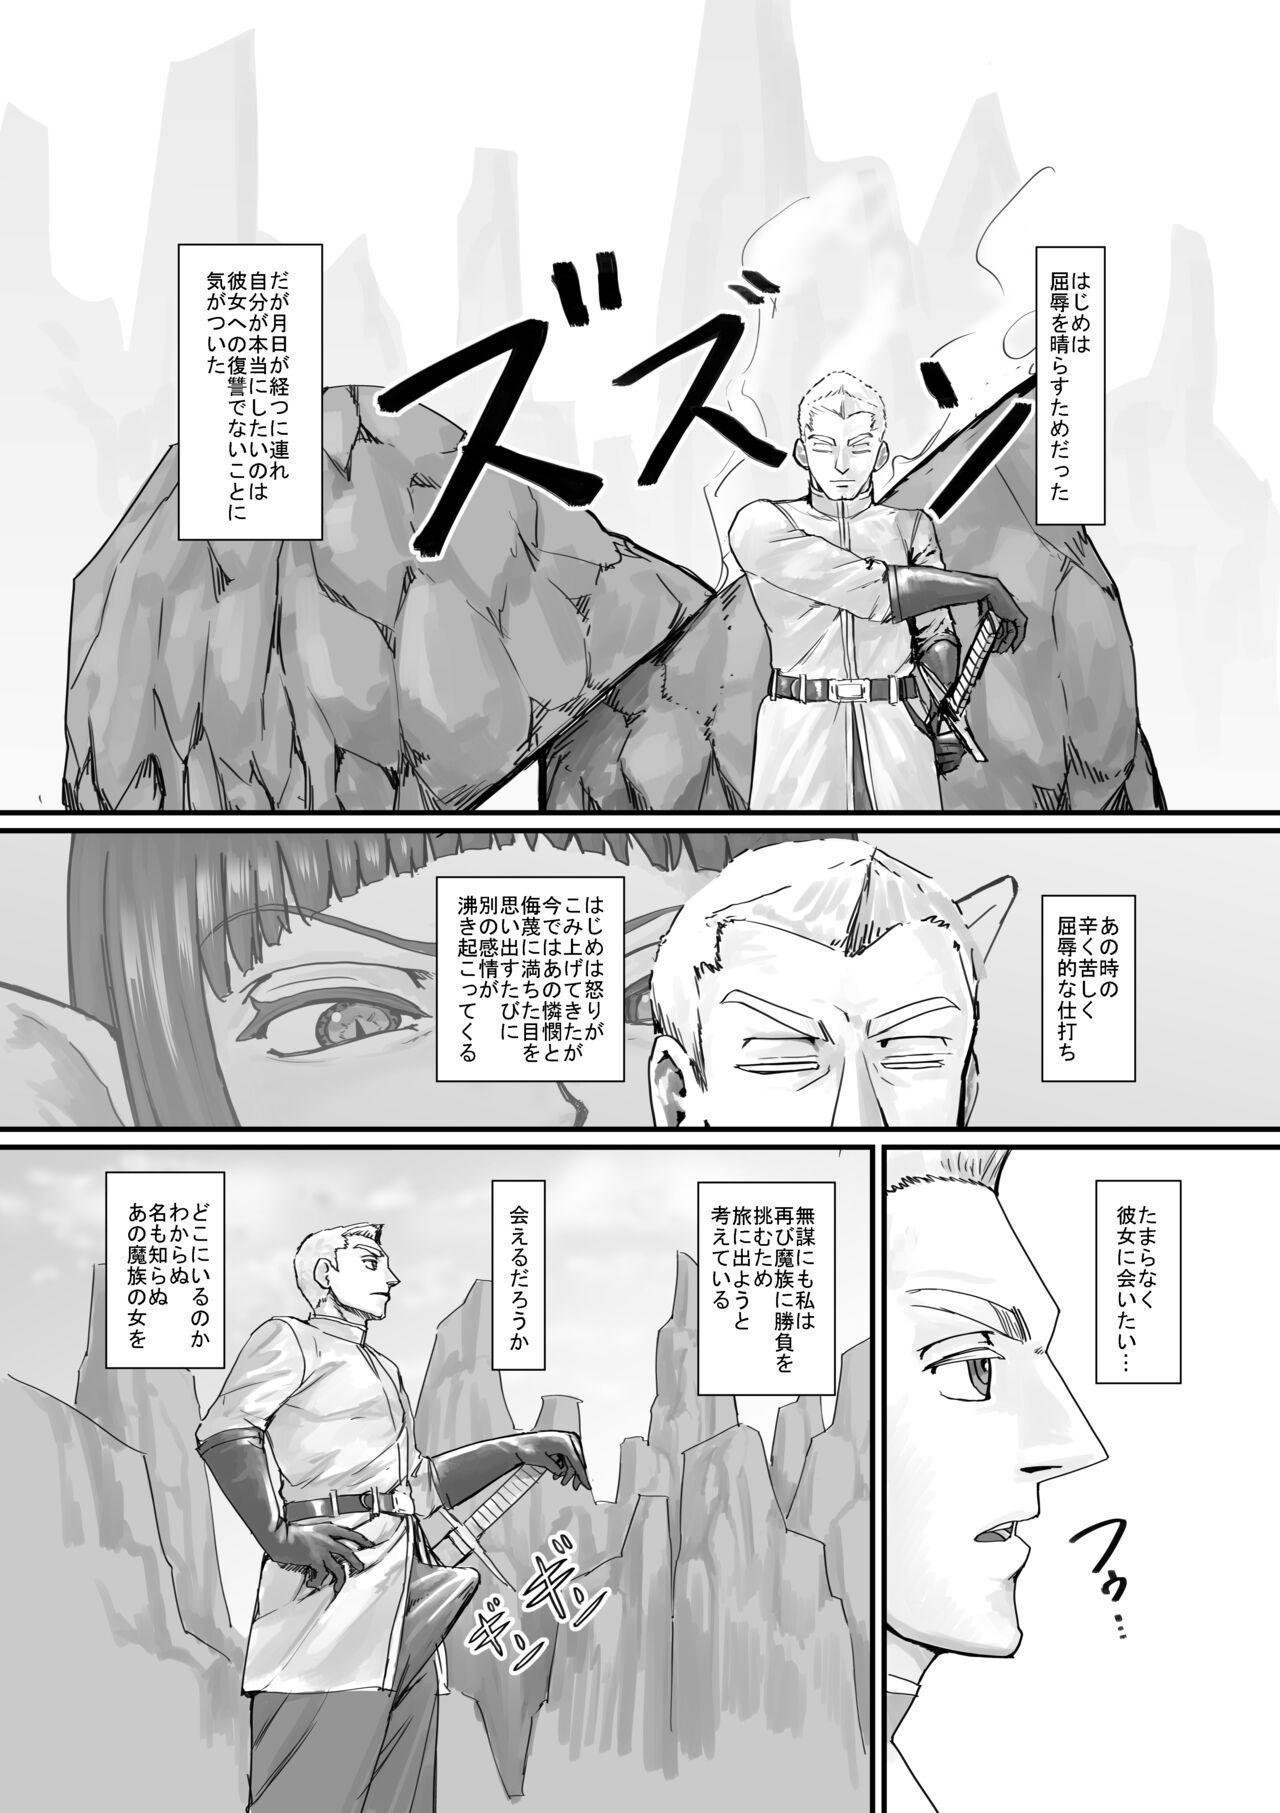 Gay Trimmed 魔族ちゃん漫画1 - Original Deutsch - Page 25